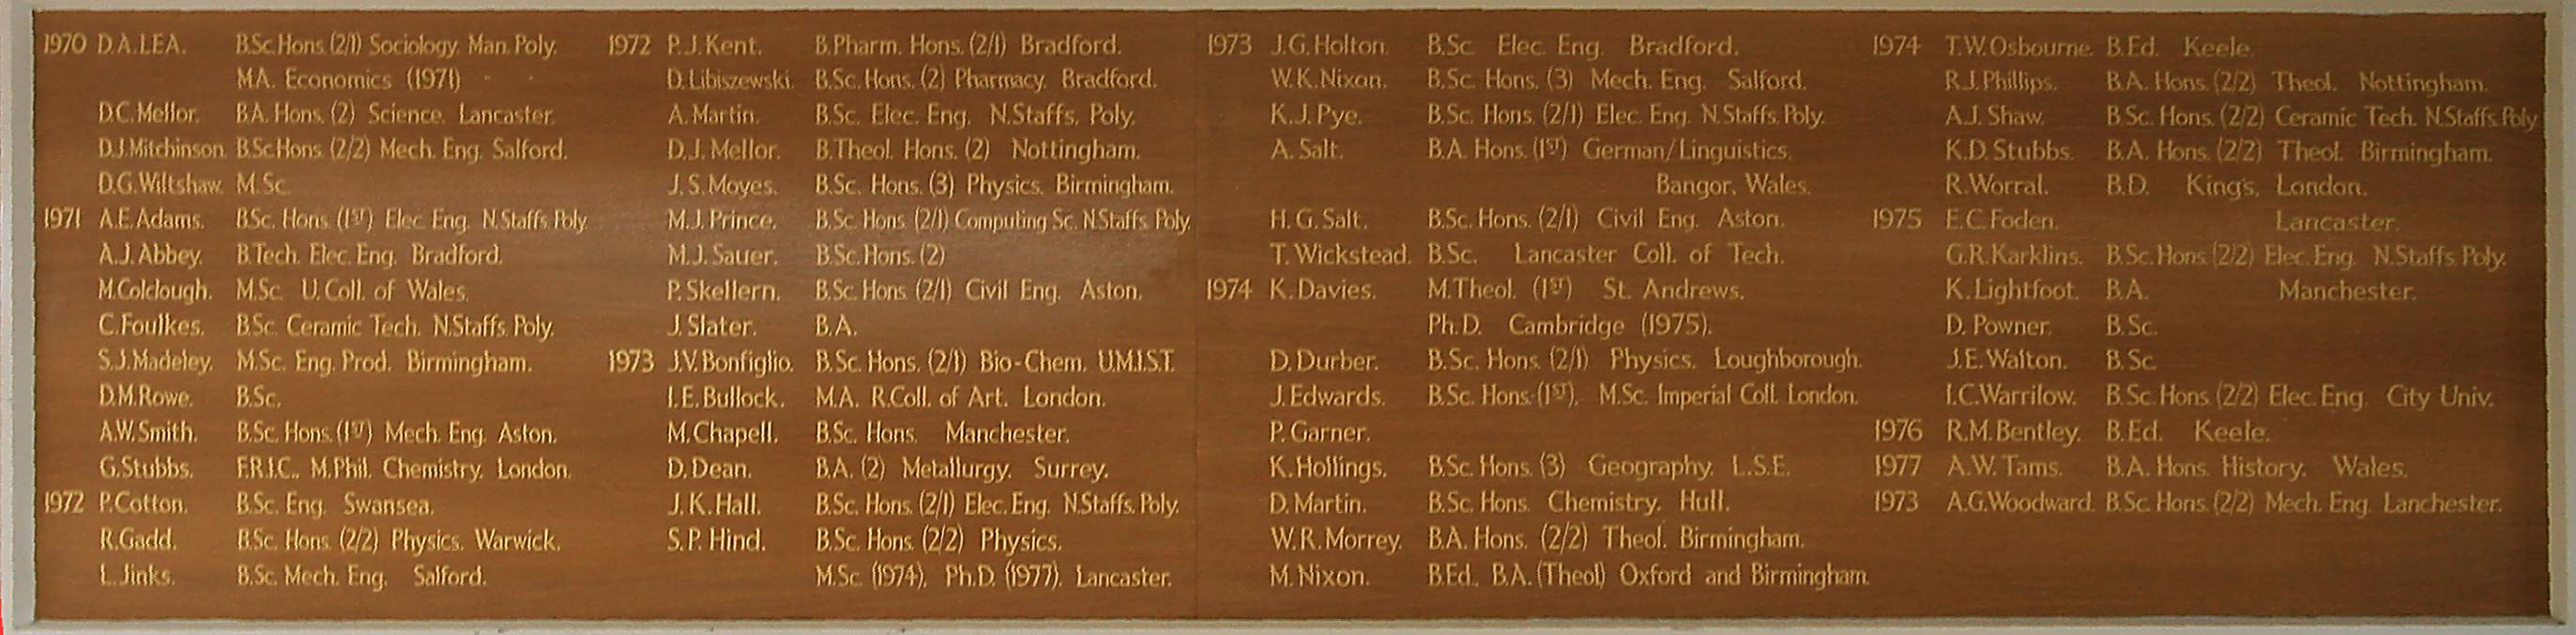 Picture of Honour Board 1970 to 1973 by Alan J Jones